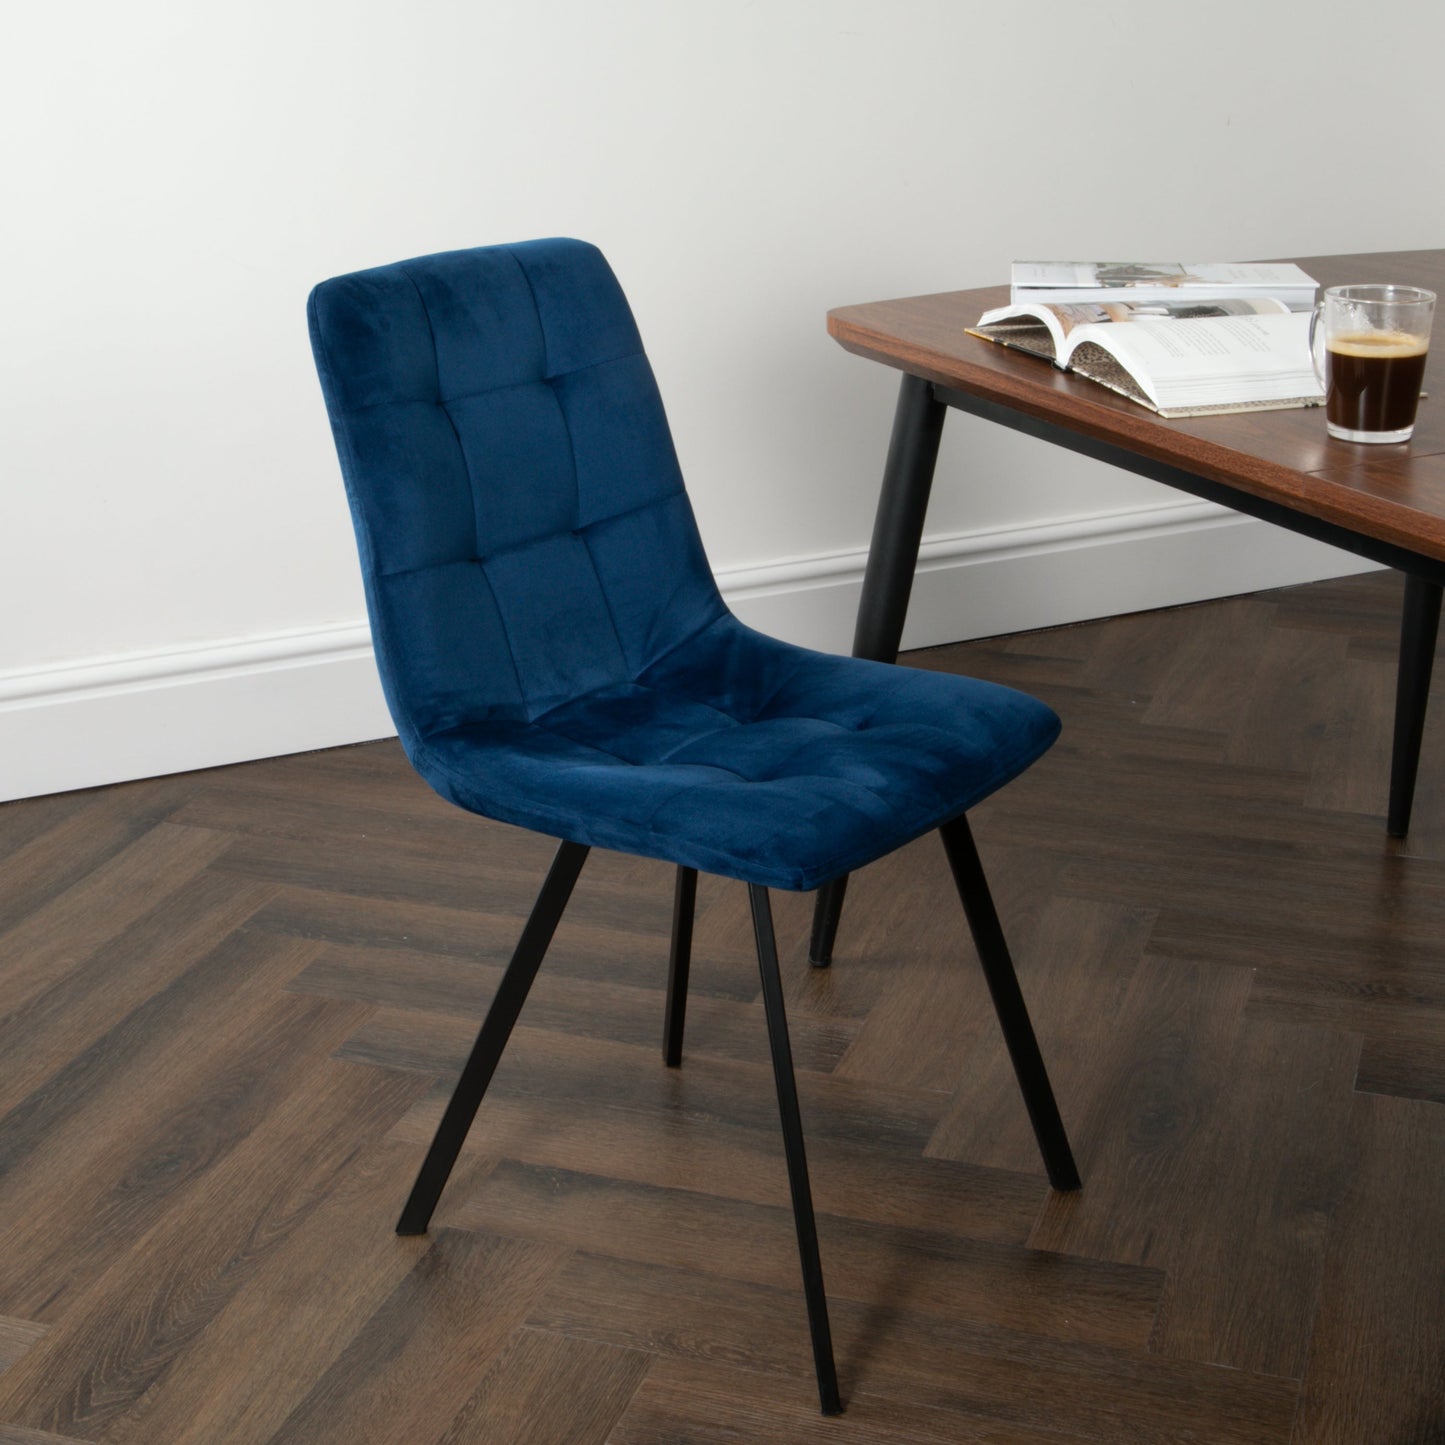 2 Set squared navy blue dining chair by Native